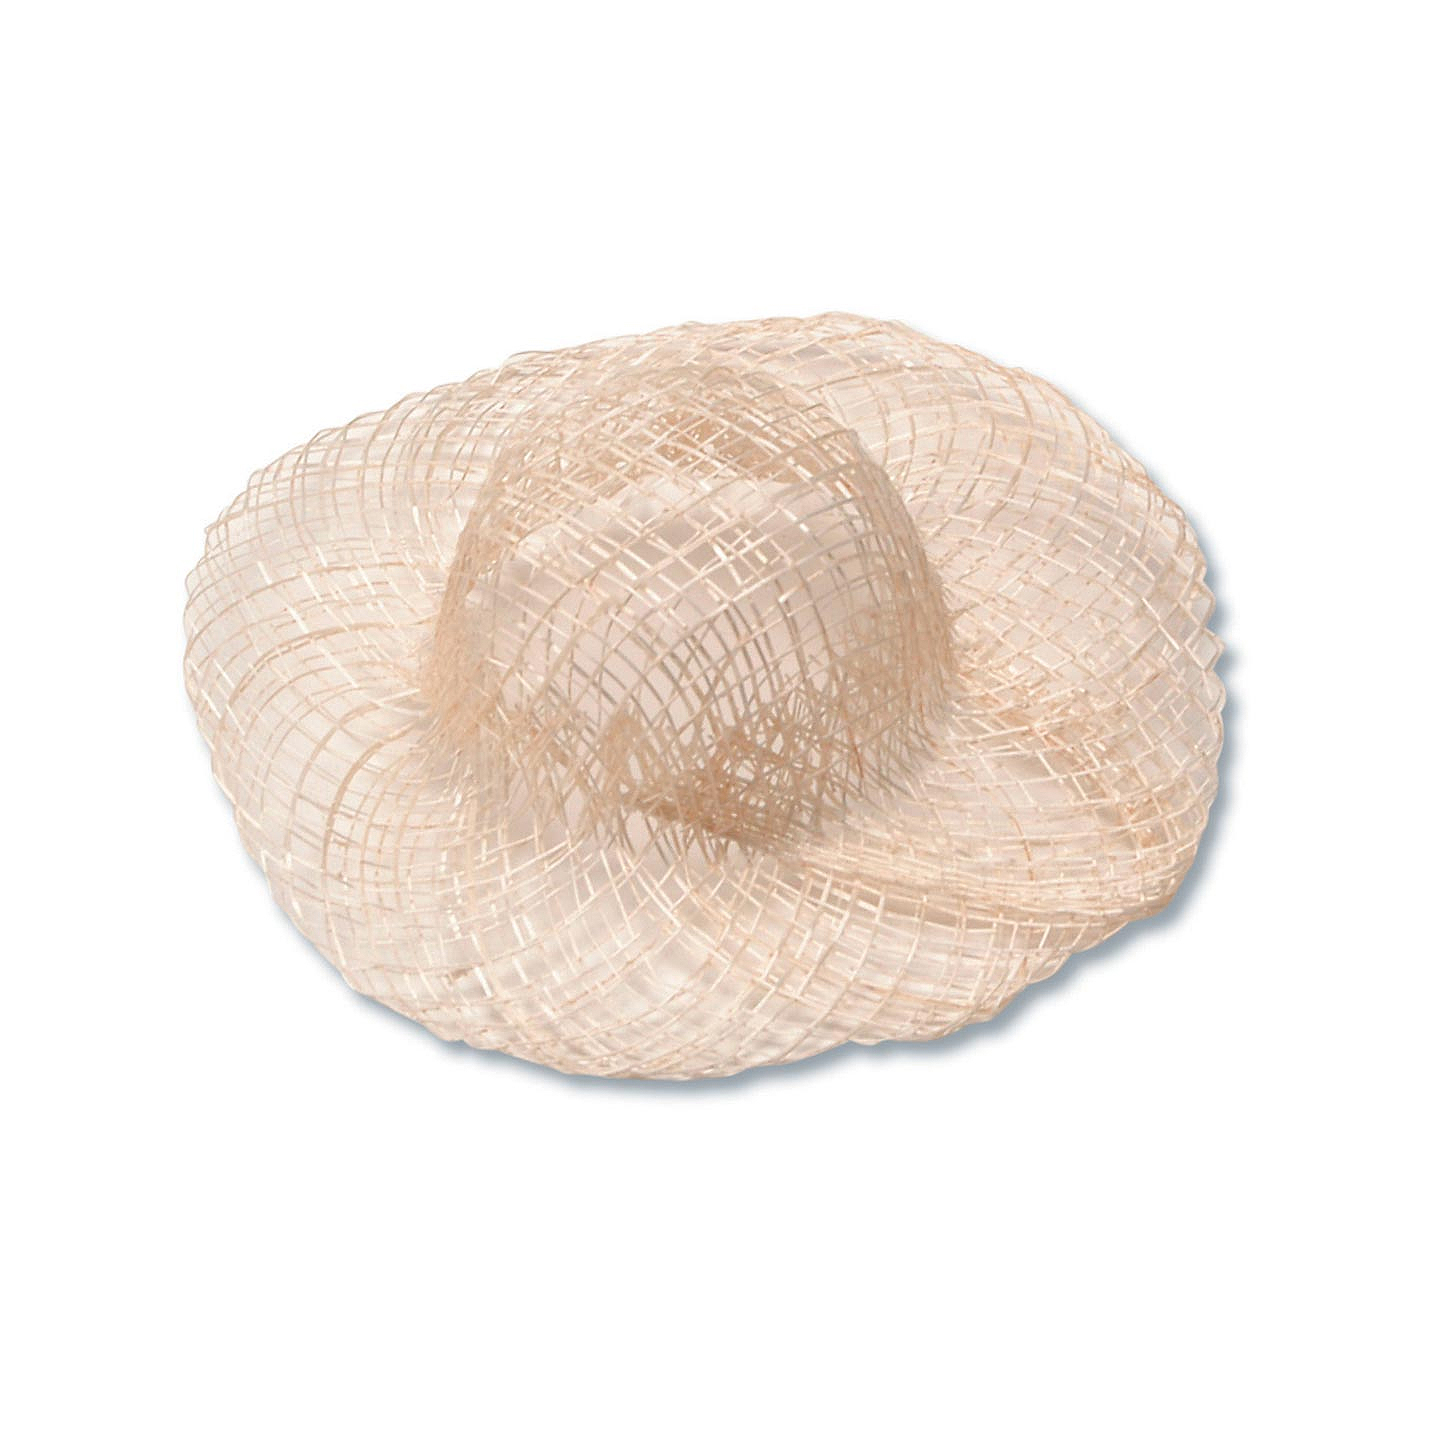 Doll Hats - Craft Hats - Straw Hats for Dolls